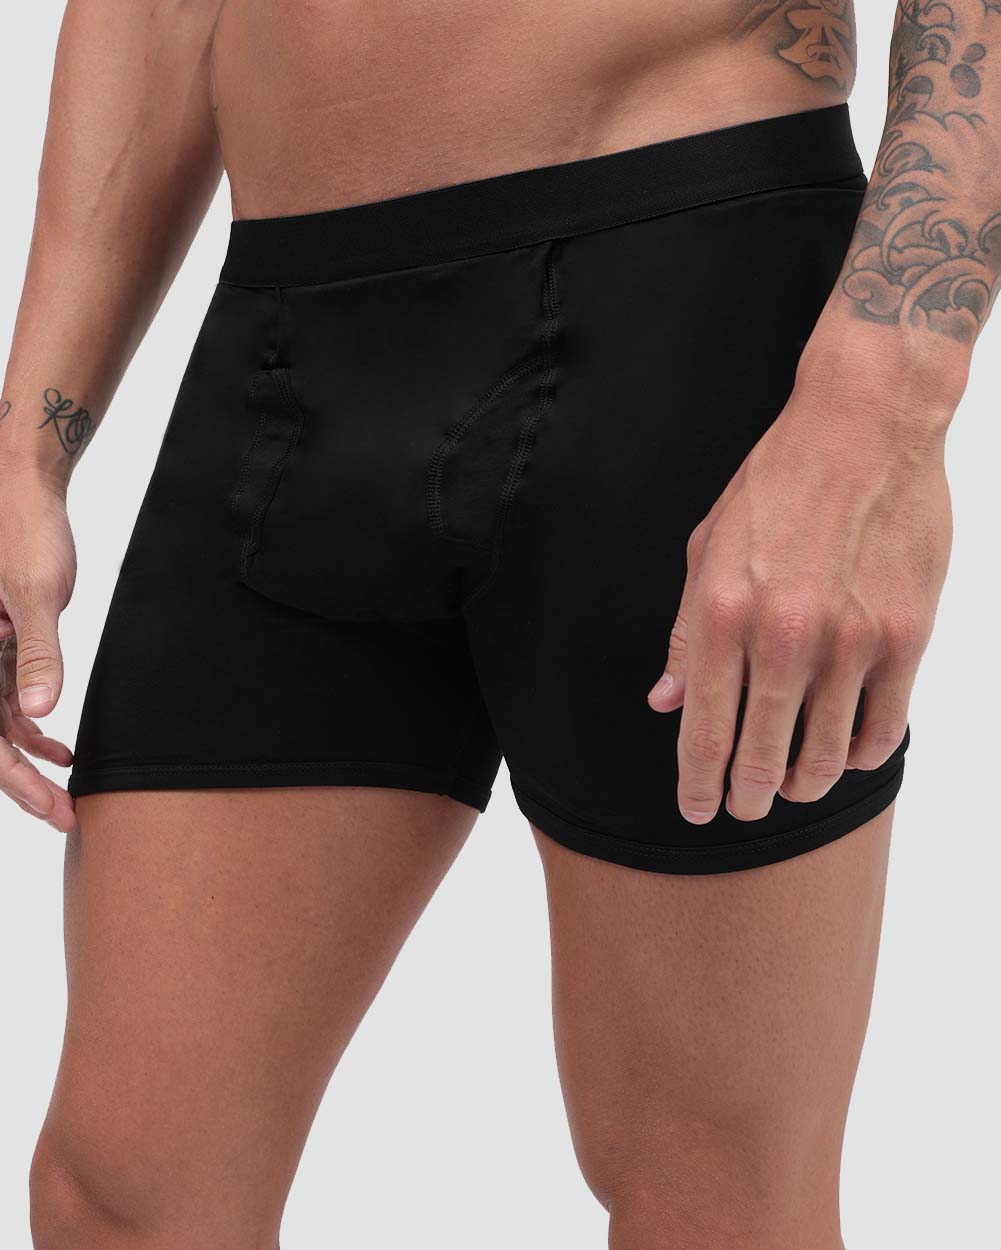 Buy men's cotton boxers with pockets